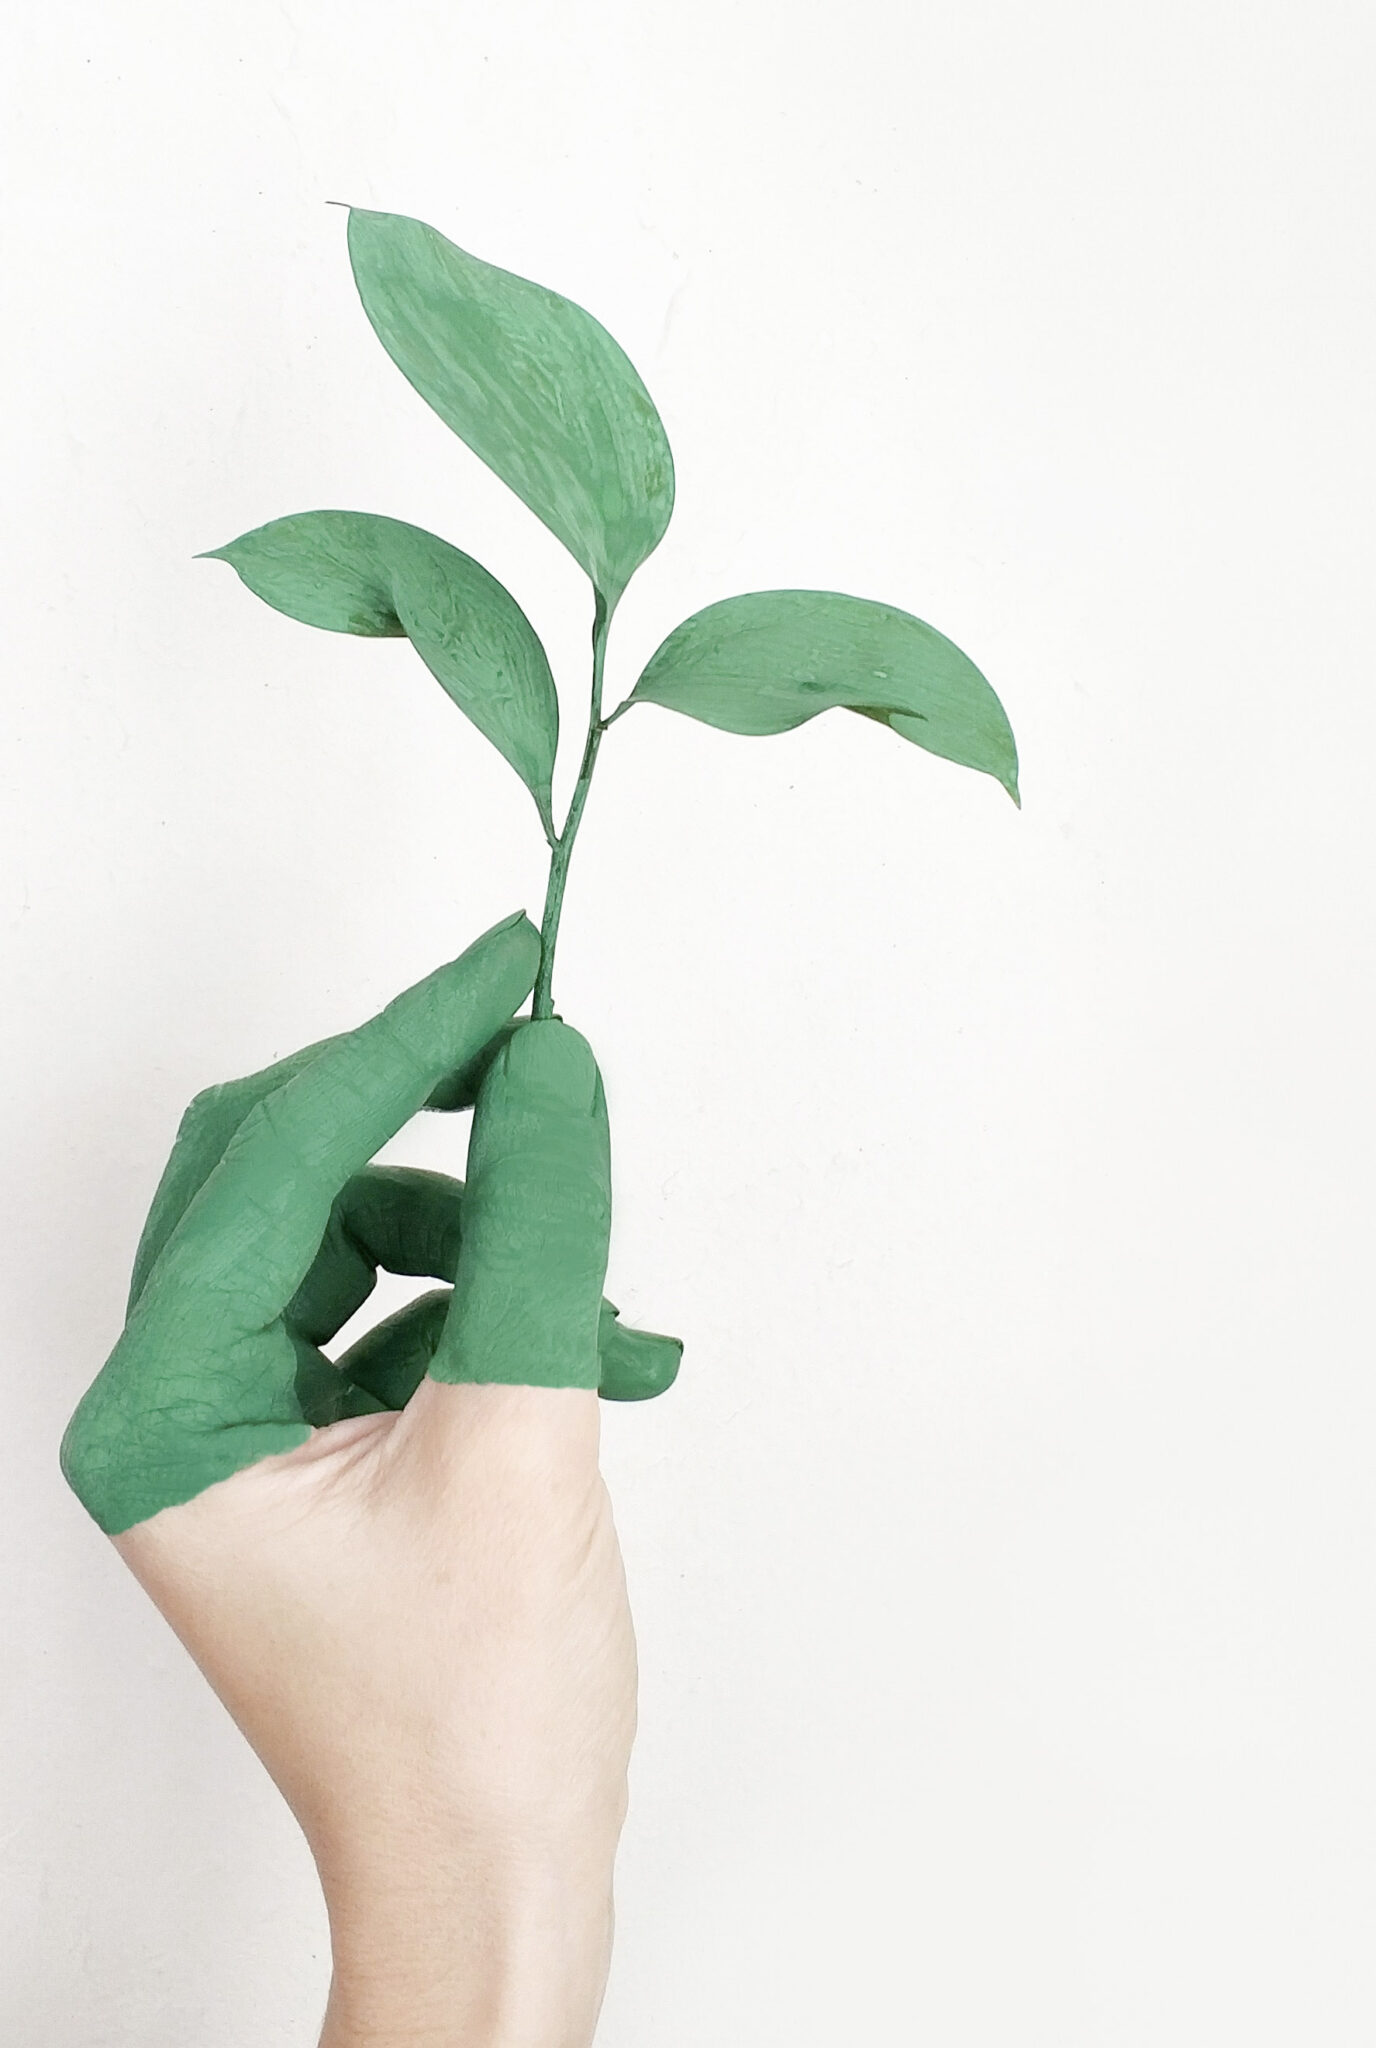 A hand is shown holding a green plant. The hand is dipped halfway in green paint. This article covers 3 ways to live a more eco-friendly lifestyle. 